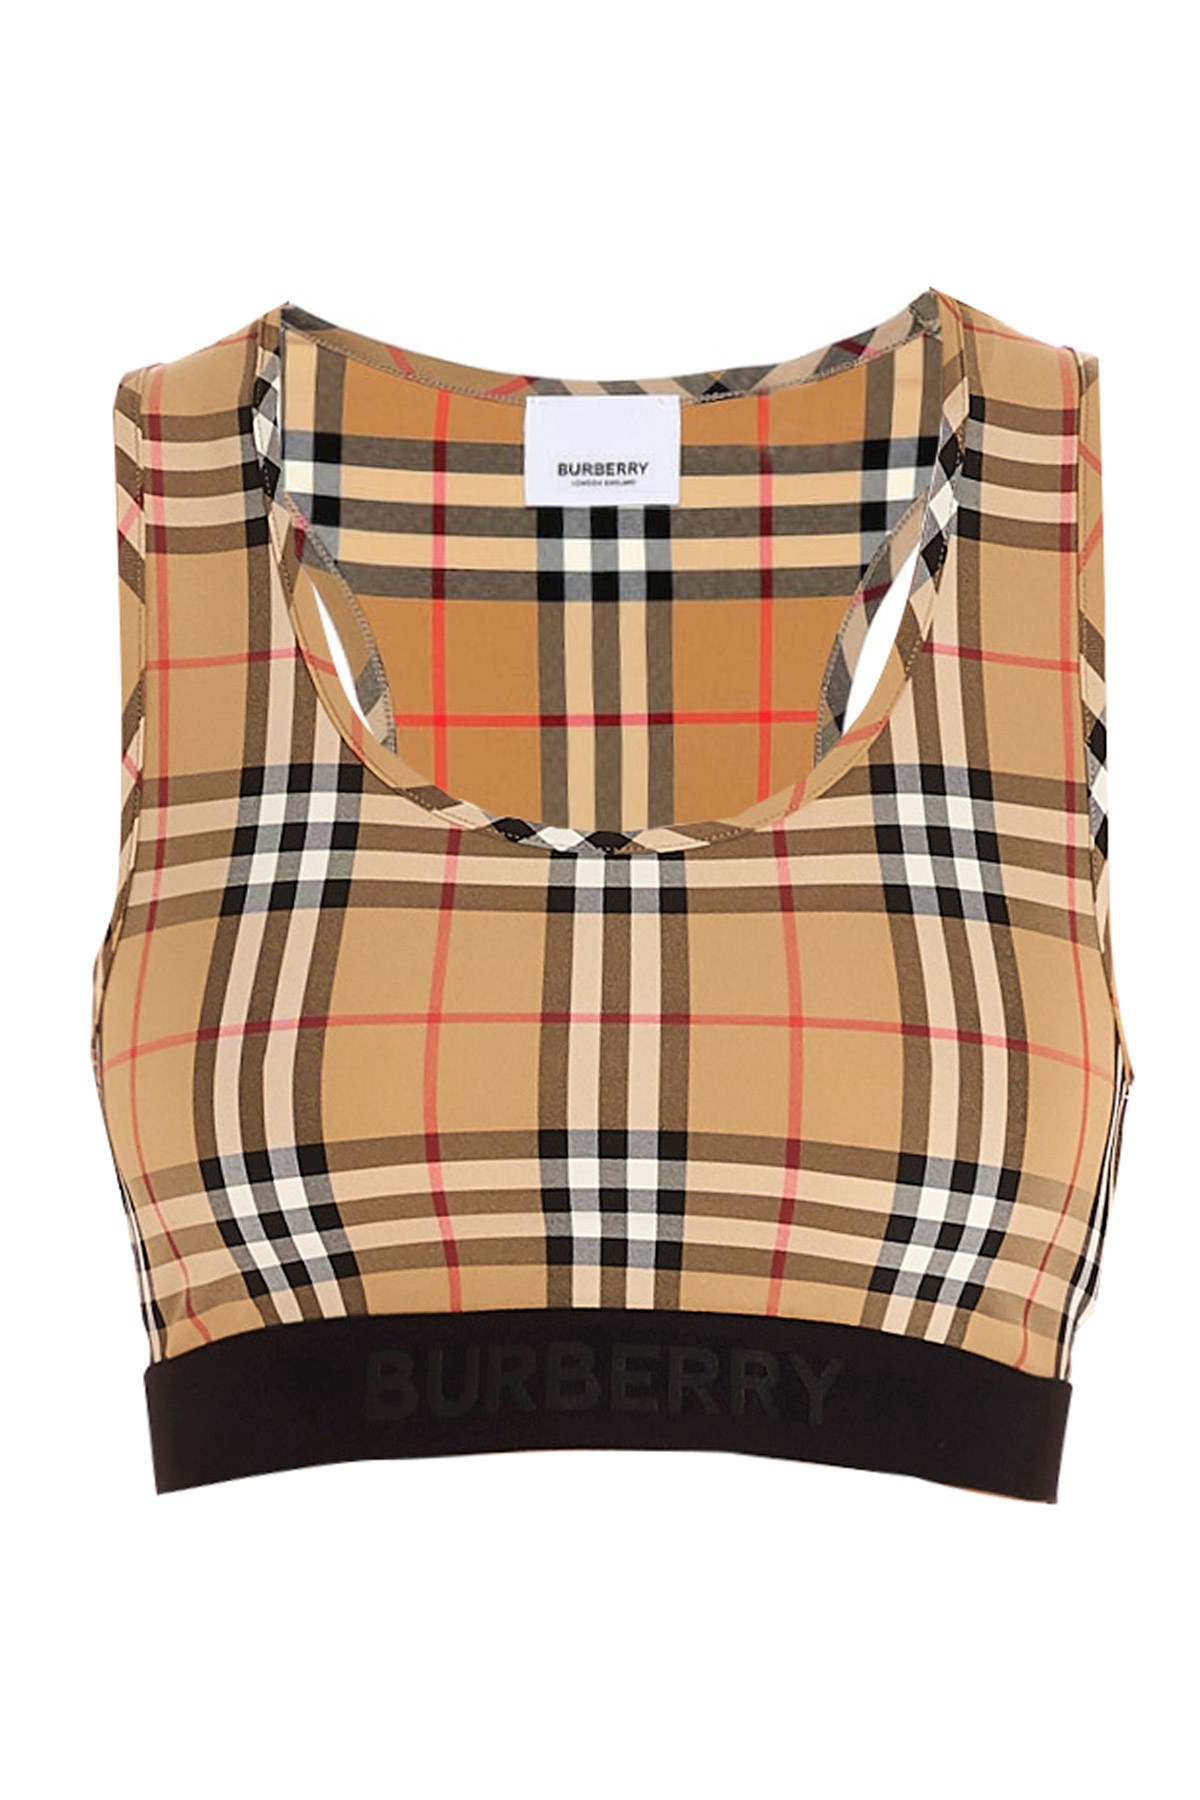 BURBERRY 'Dalby’ Top